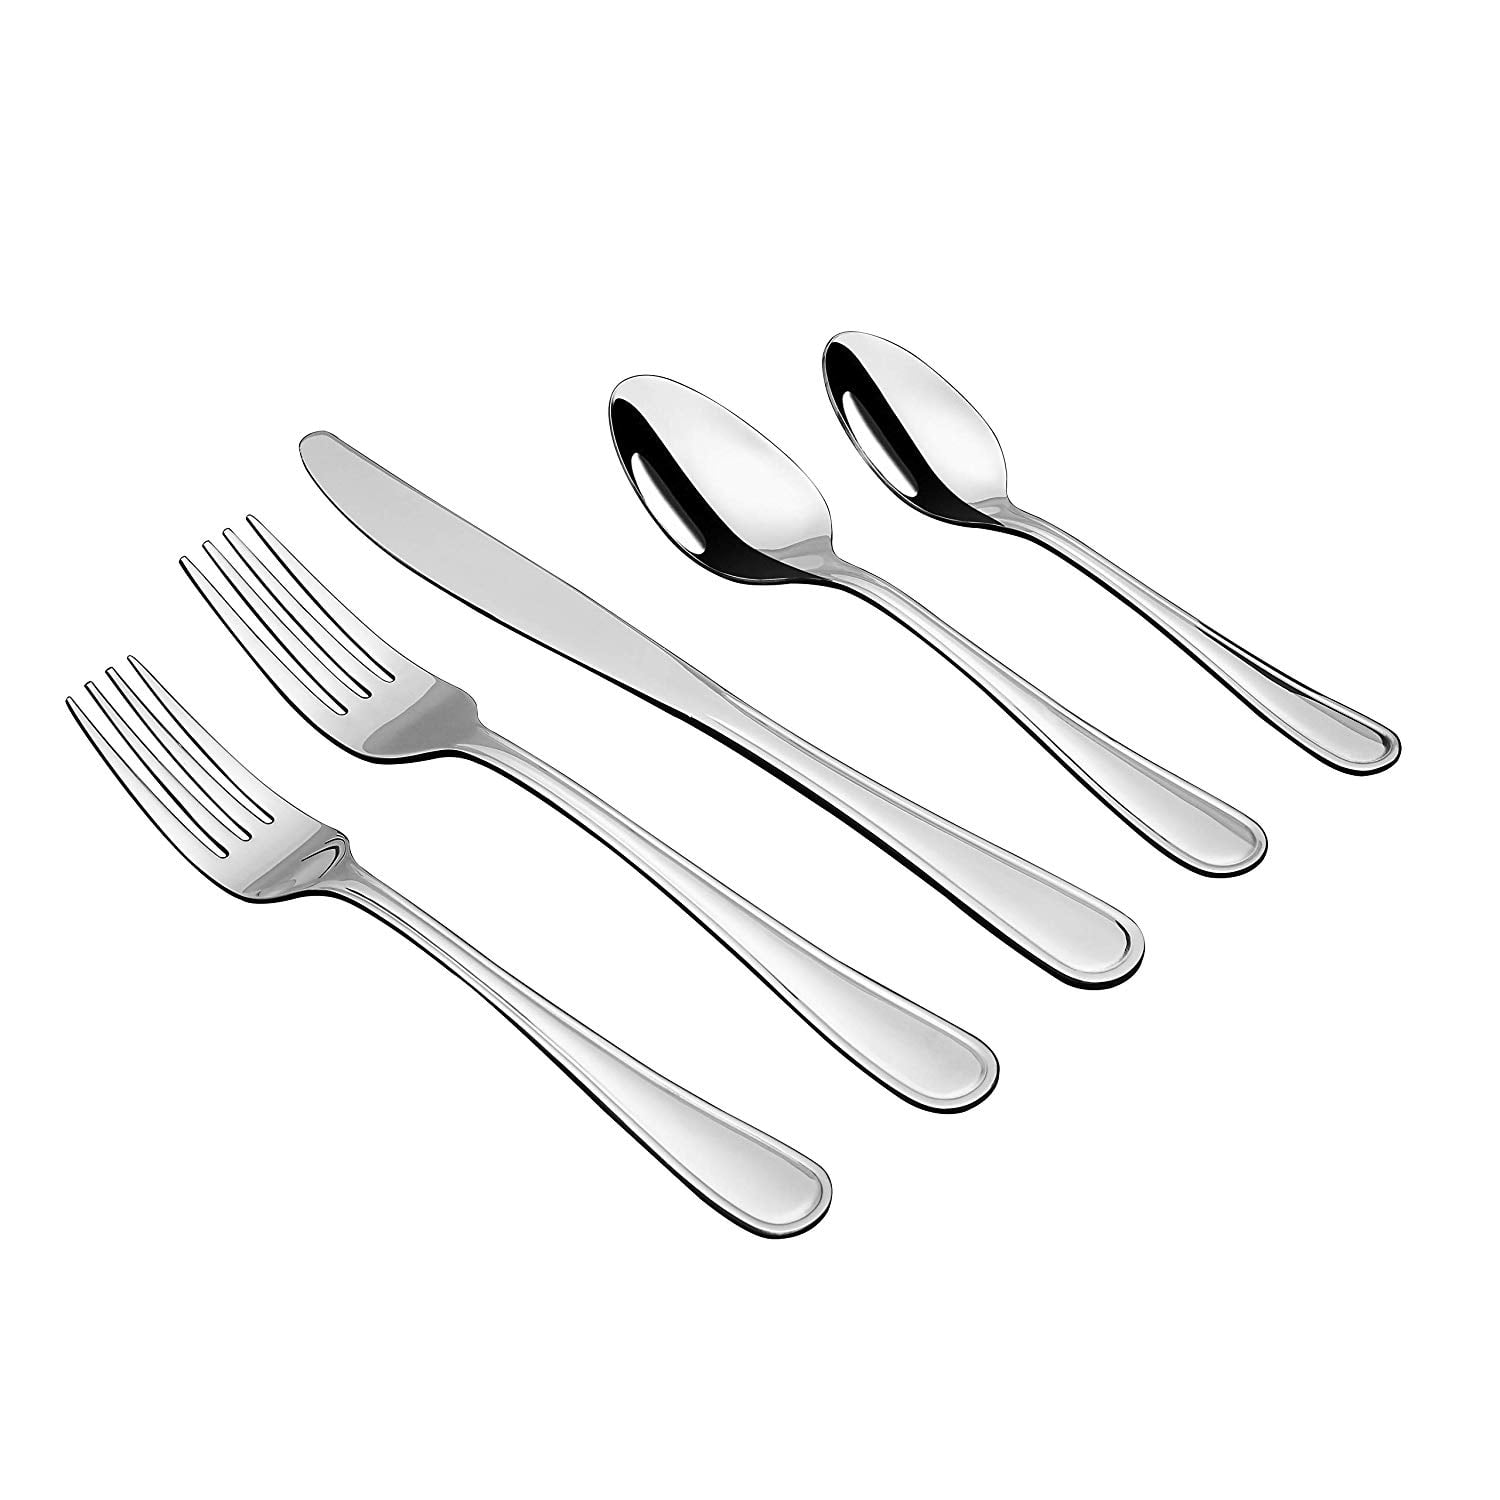 5.5 x 1.375 in. Silicone Spoon Plus Fork Set - Good Food Mood 